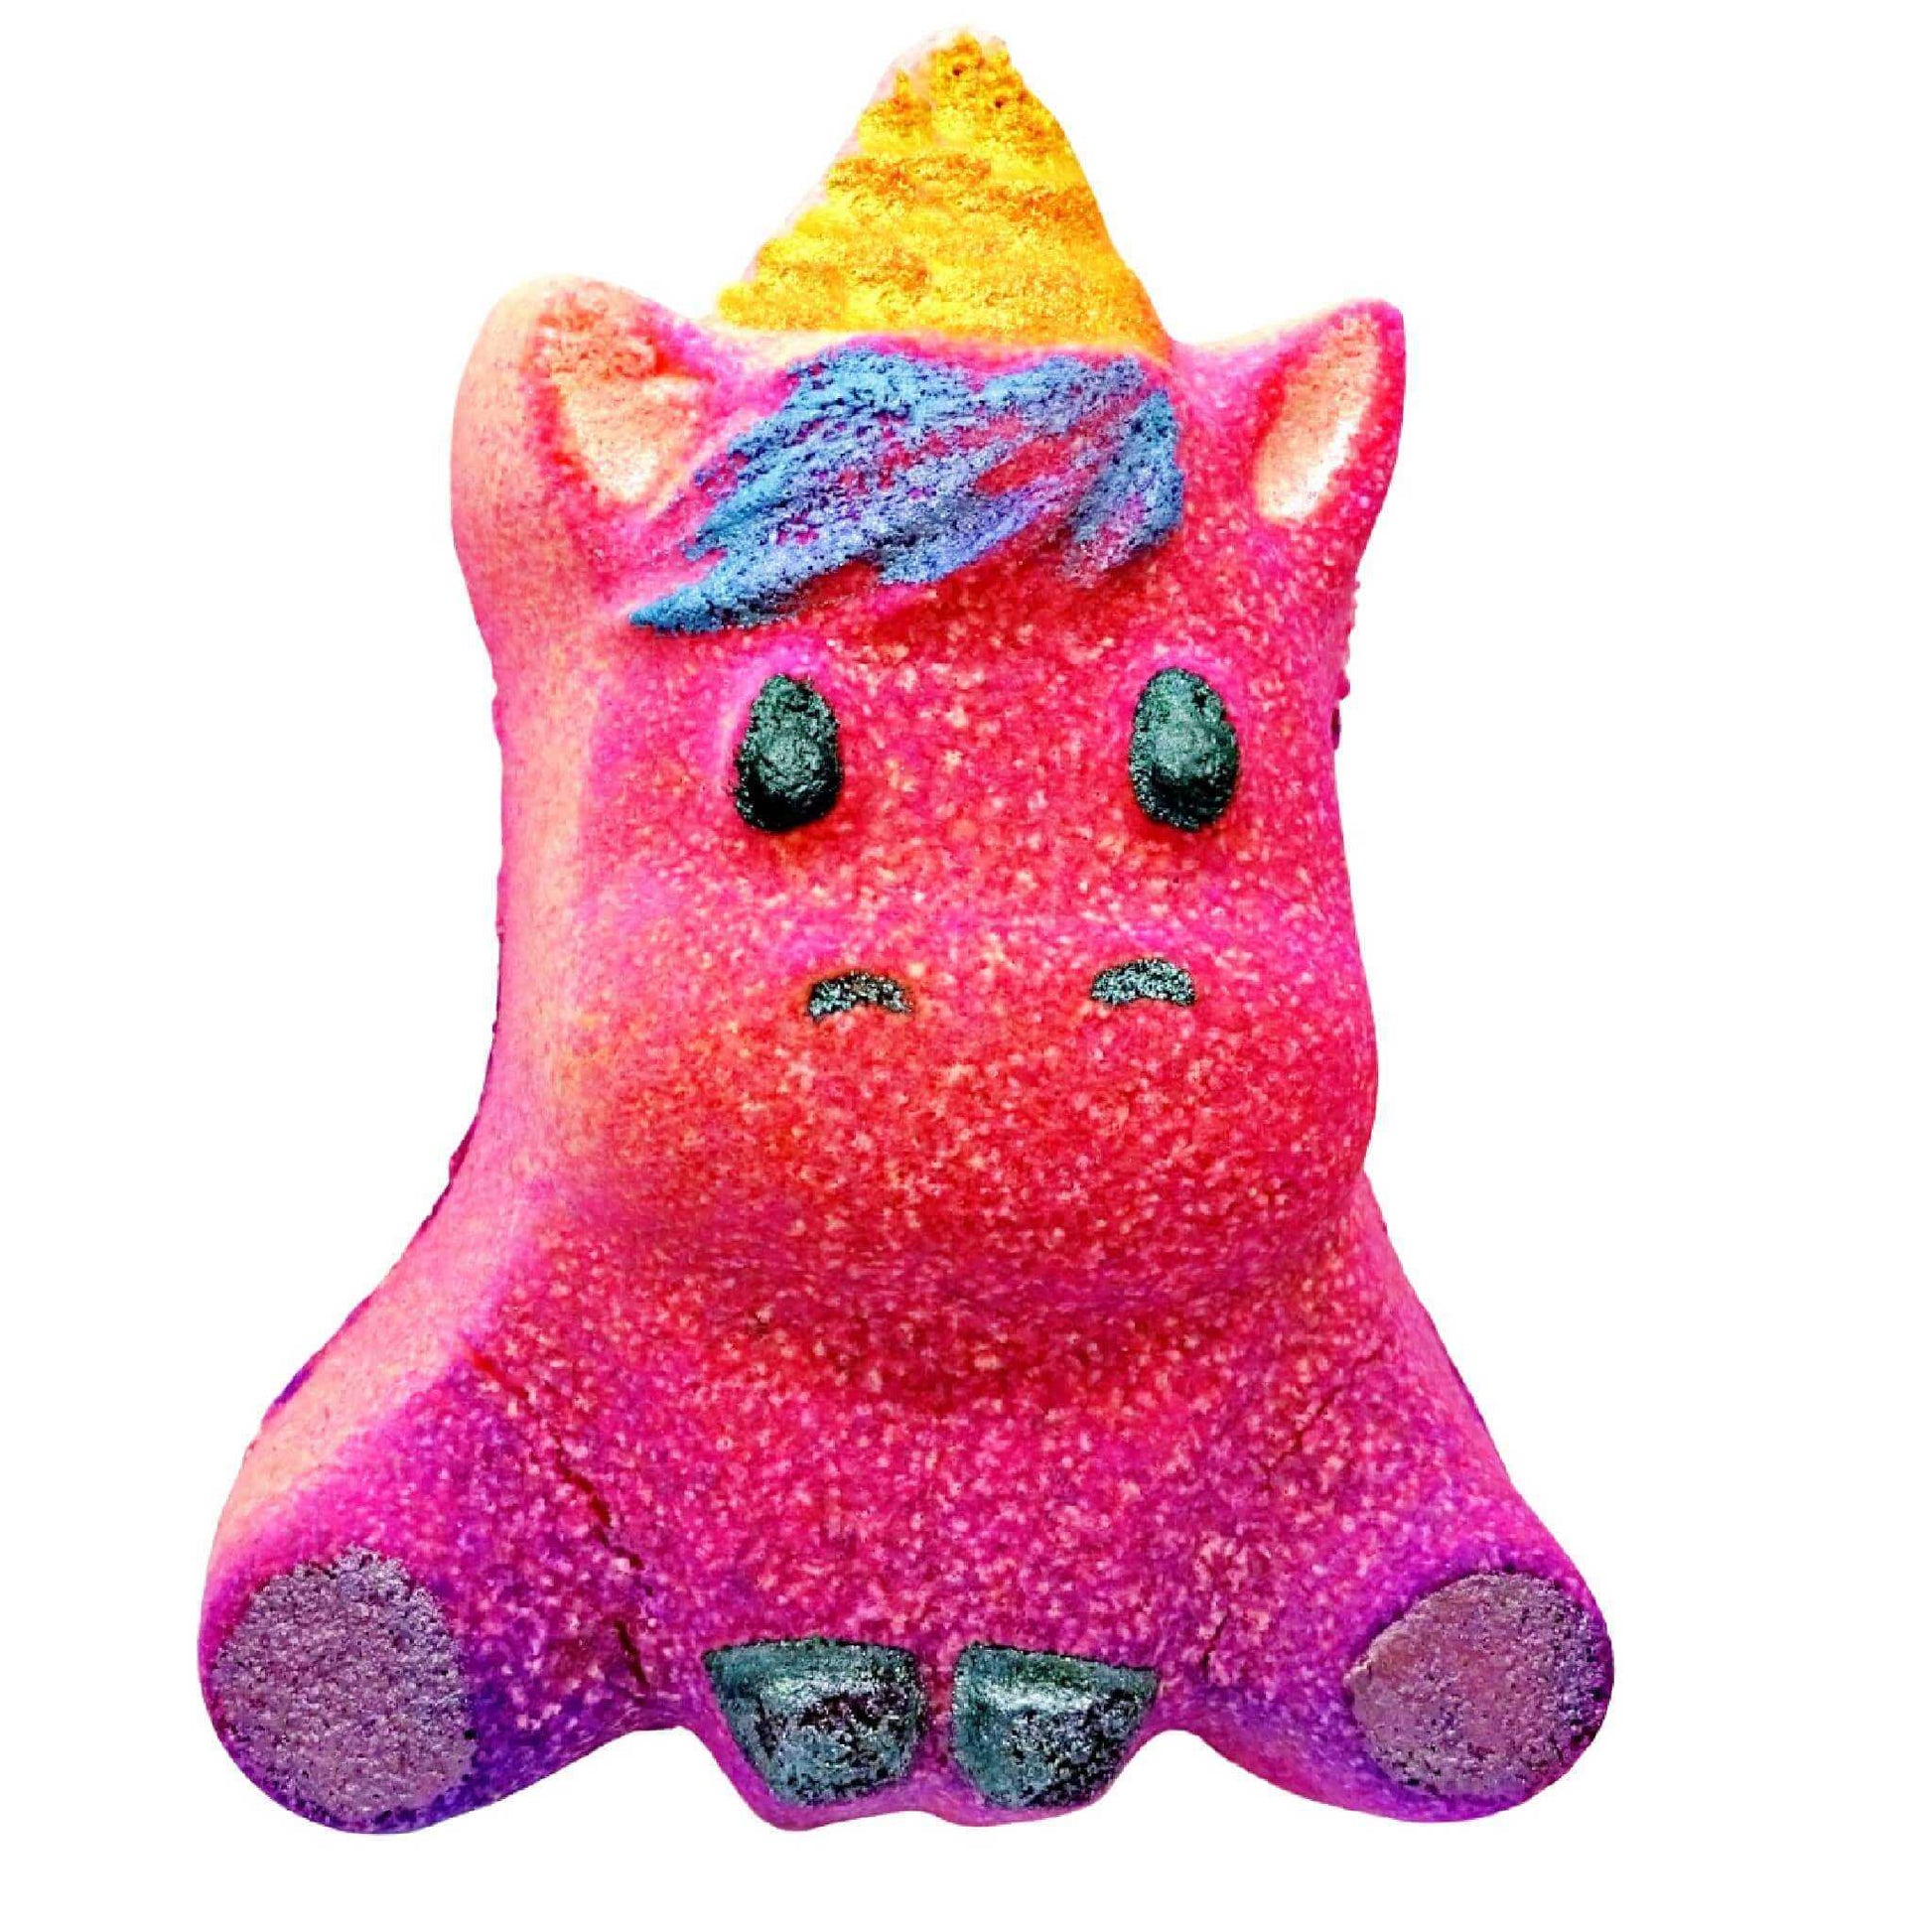 Indulge in the enchanting taste of our Unicorn-inspired Raspberry Lemonade Fizzy Bomb. A treat you won't forget!